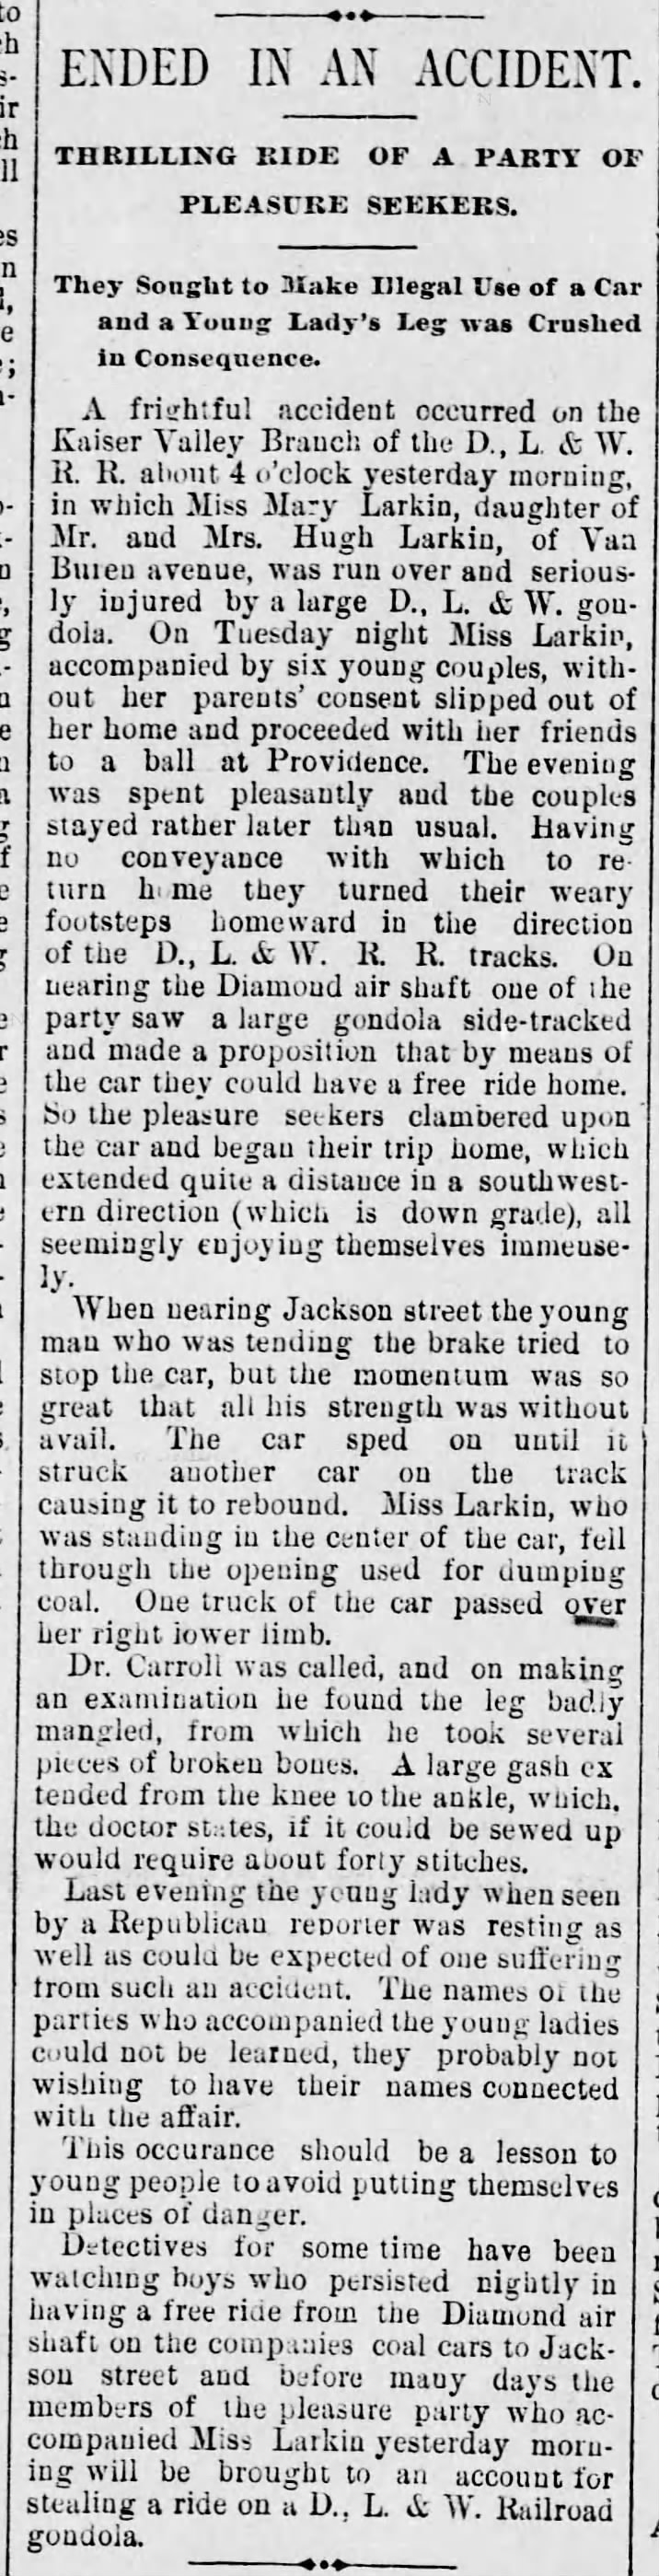 Ended in an Accident, Scranton Republican, 27 Apr 1893